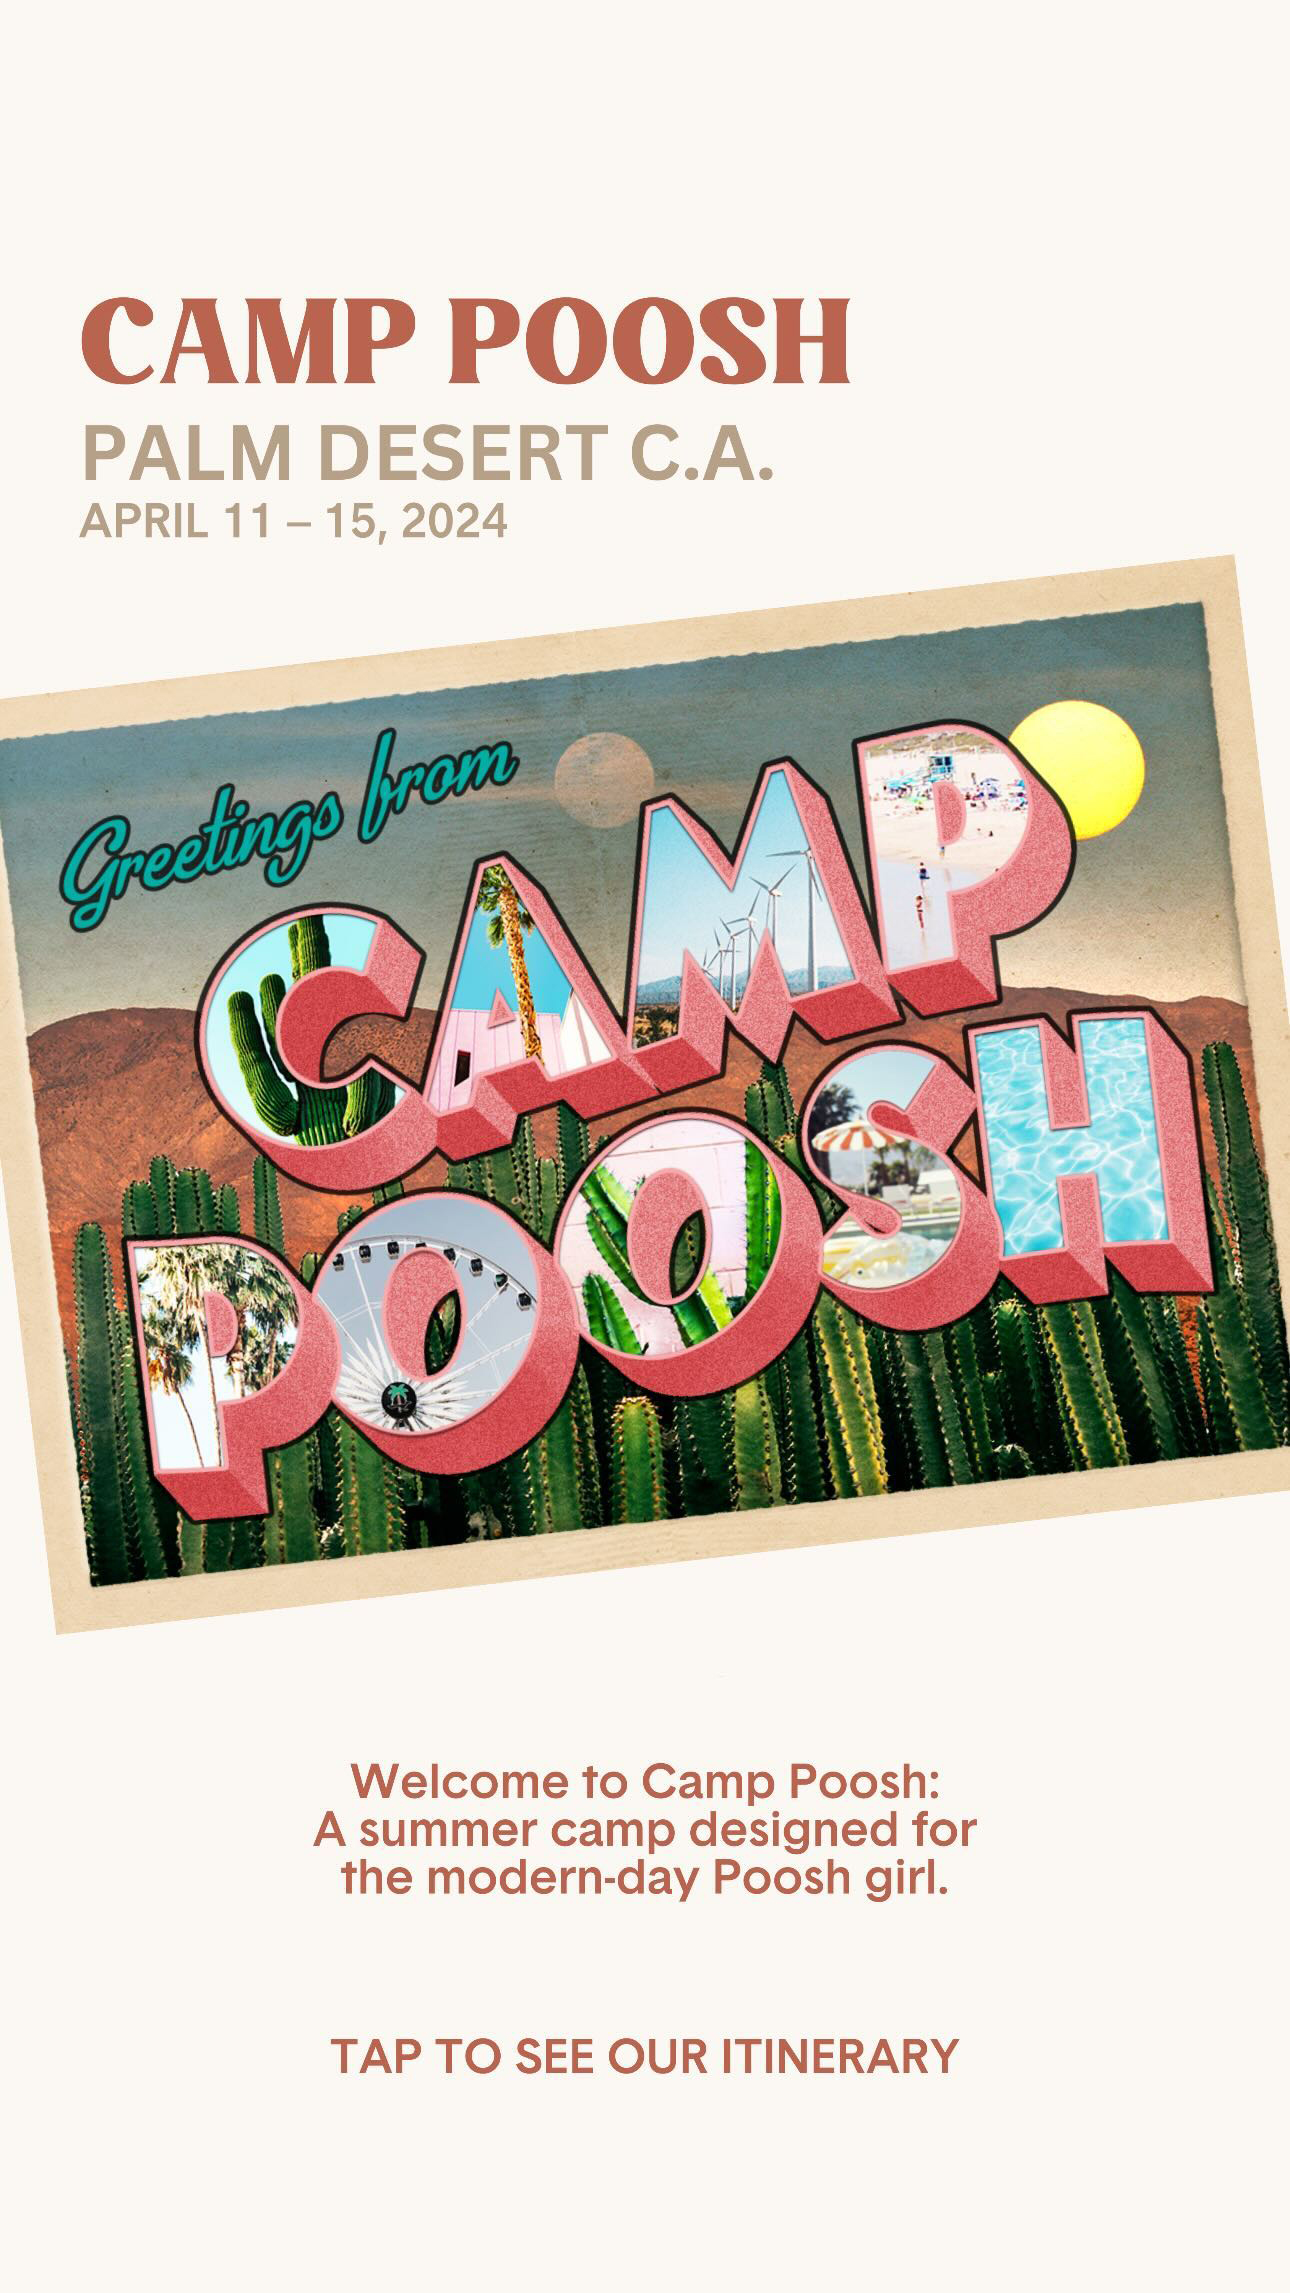 The wellness brand's Instagram Stories were filled with details regarding the 3rd Annual Camp Poosh event